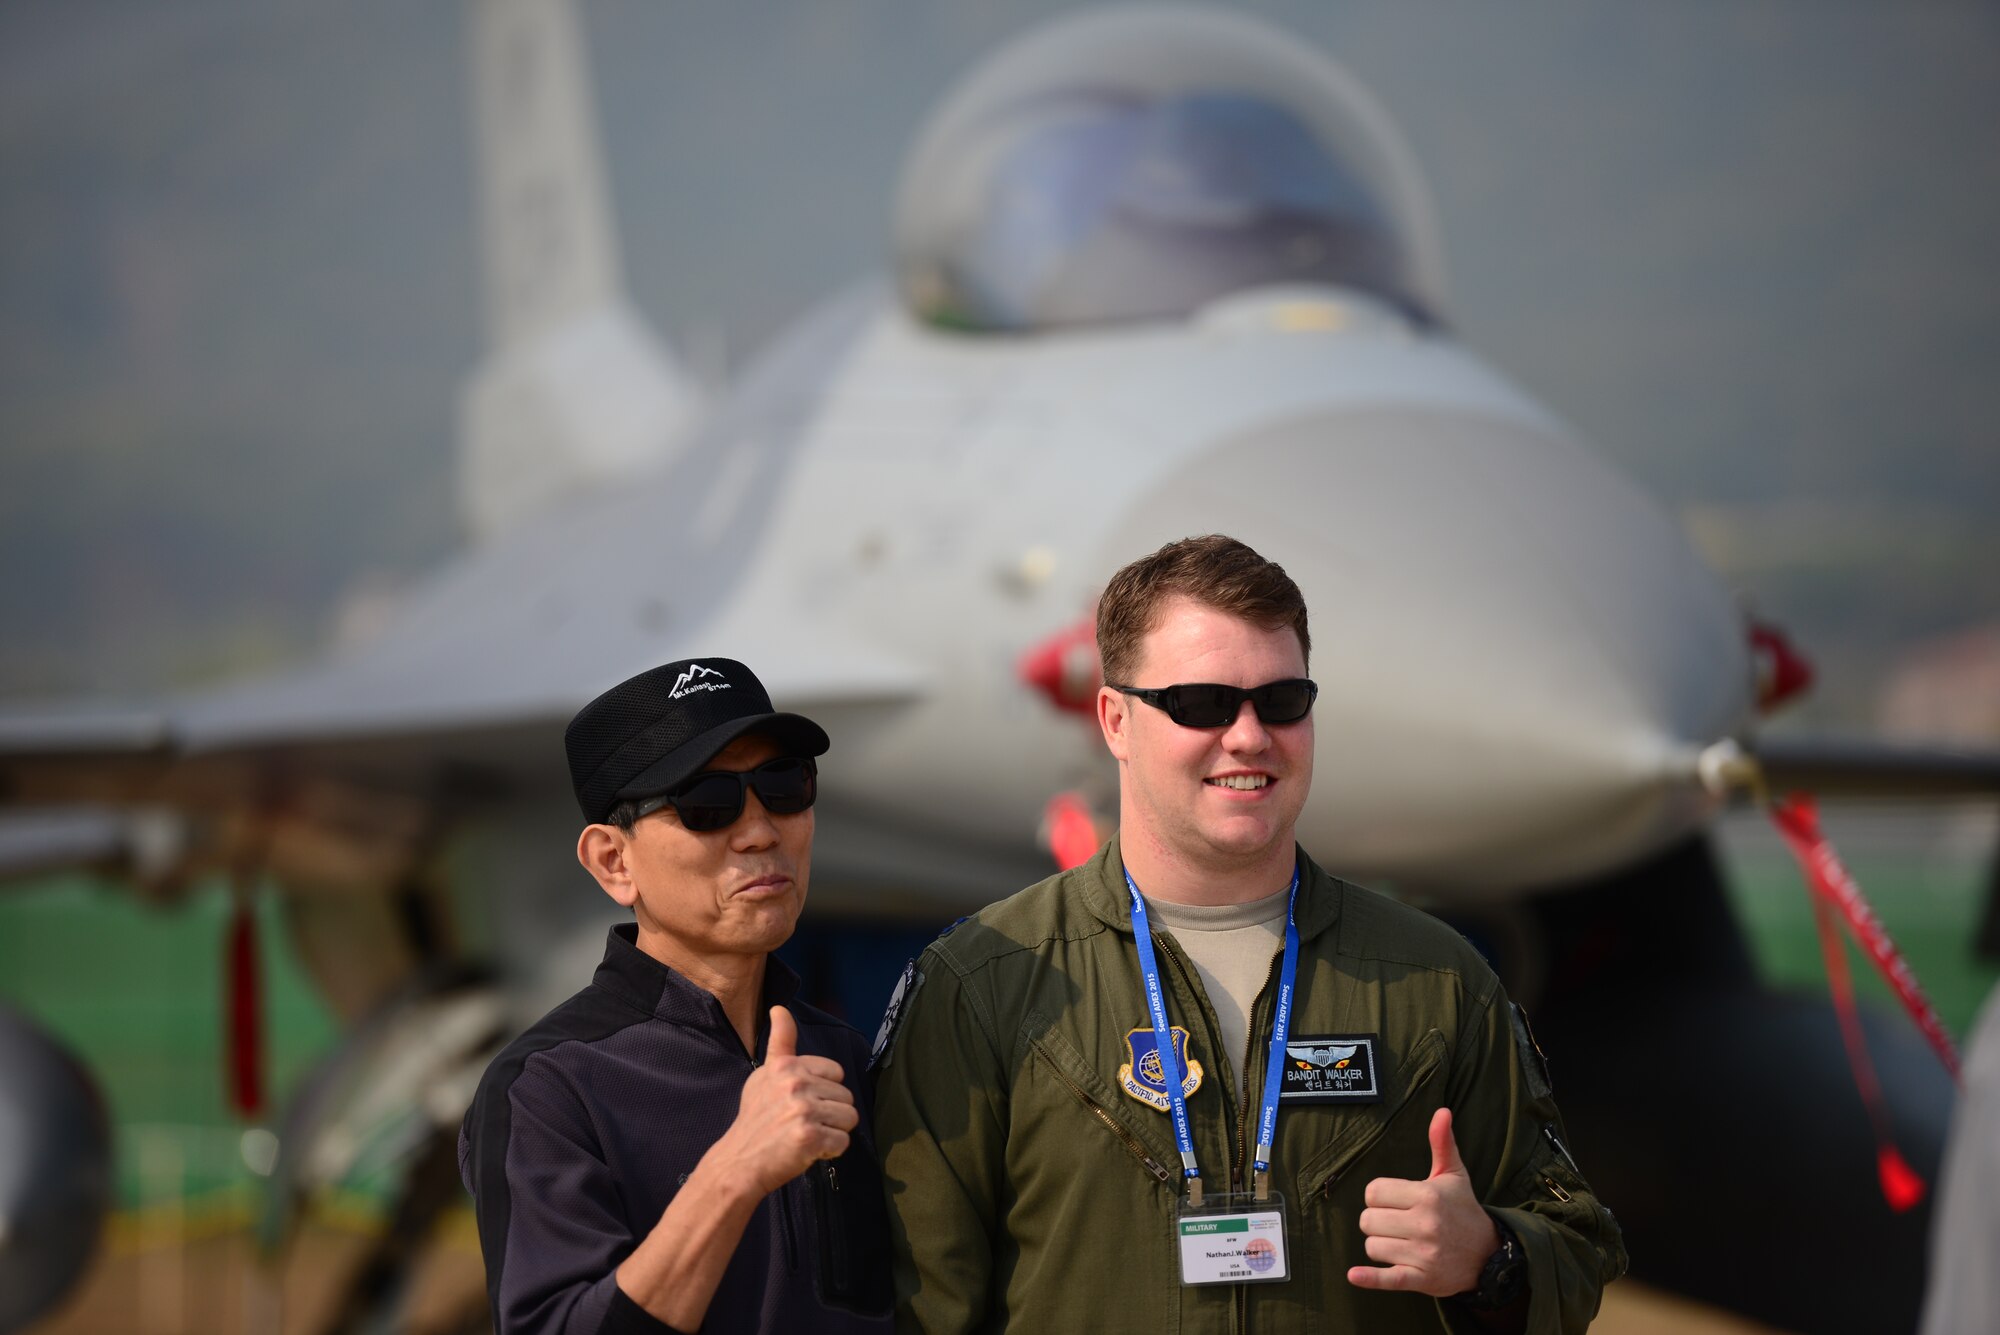 Capt. Nathan Walker, 35th Fighter Squadron, poses with a local Korean in front of an F-16 Fighting Falcon from Kunsan Air Base, at the Seoul International Aerospace and Defense Exhibition held just outside of Seoul, Republic of Korea, Oct. 19, 2015. The Seoul ADEX gives American service members a chance to showcase their outstanding aircraft and equipment to the Korean public. (U.S. Air Force photo/Staff Sgt. Amber Grimm)